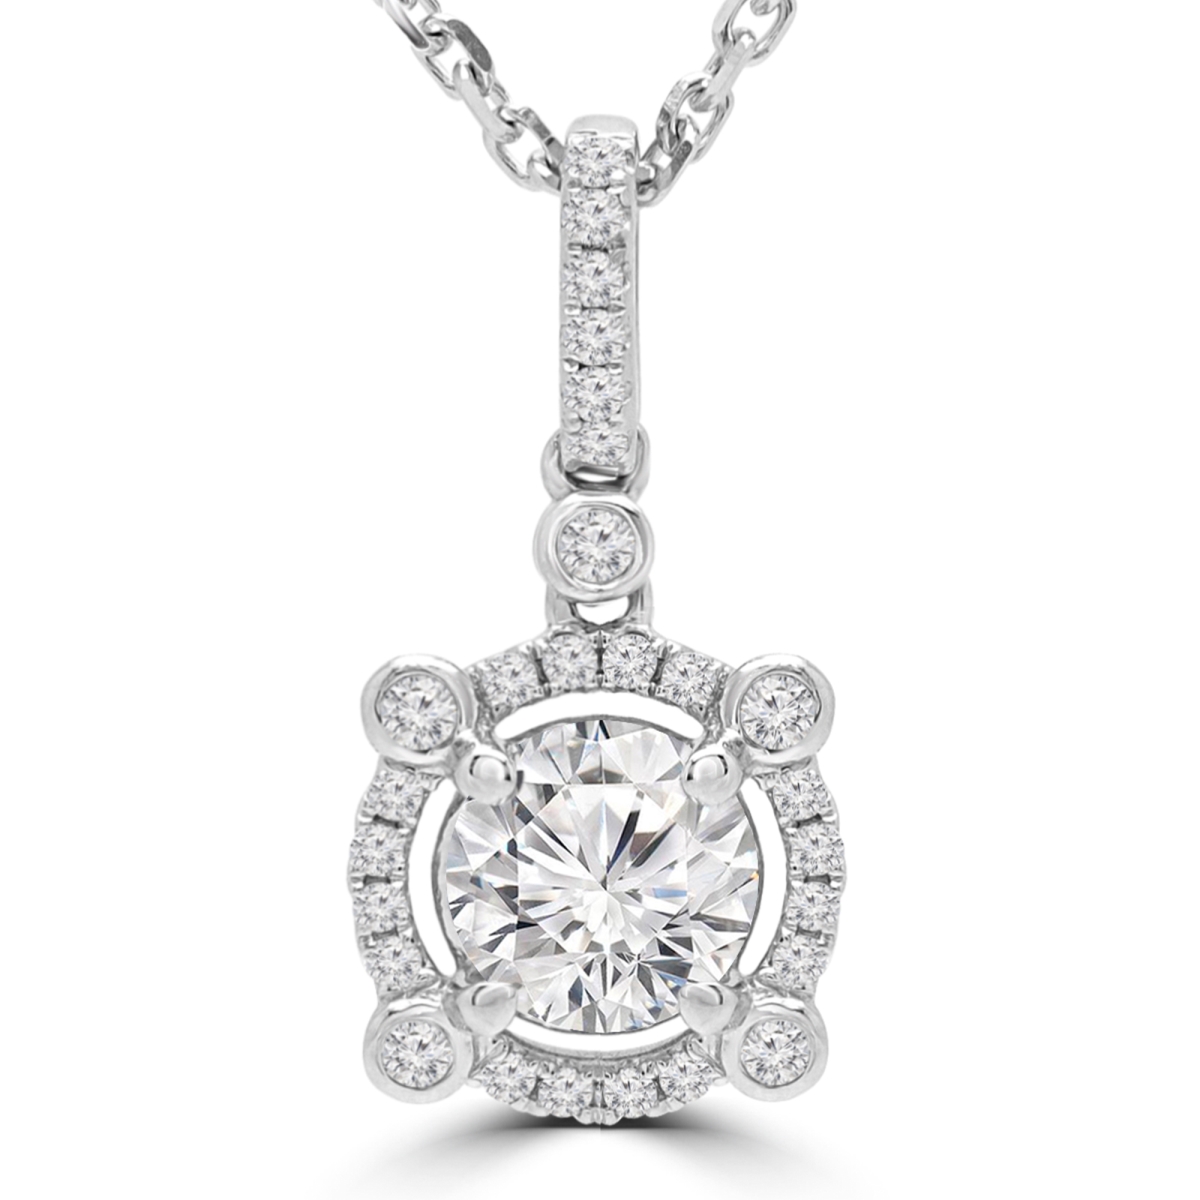 Md190520 0.5 Ctw Round Diamond Halo Pendant Necklace In 18k White Gold